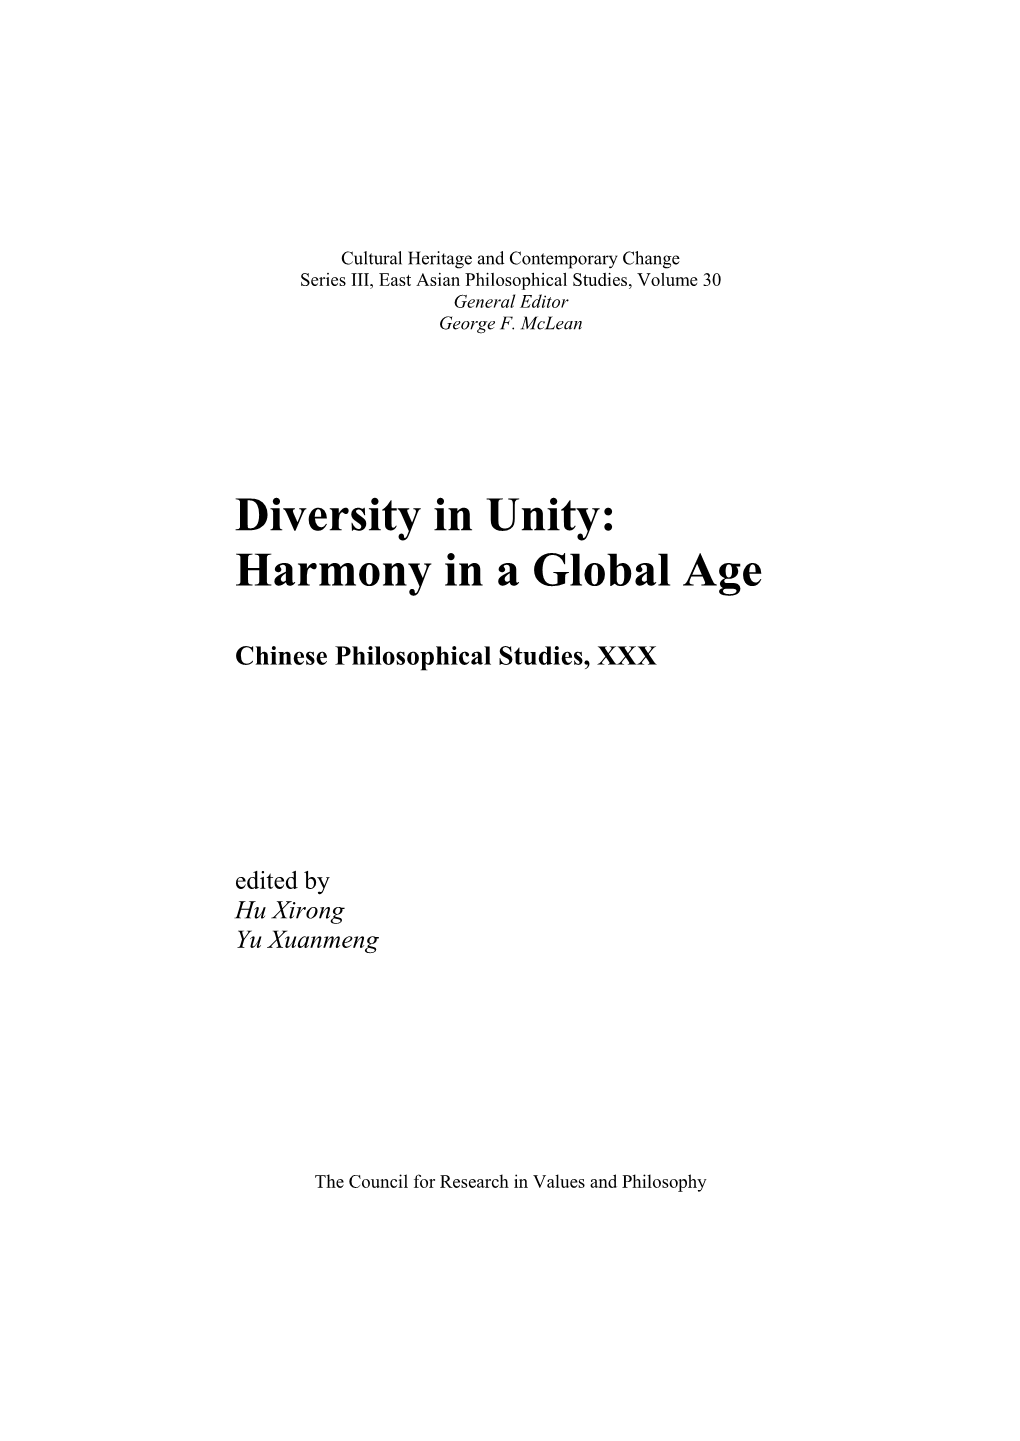 Diversity in Unity: Harmony in a Global Age